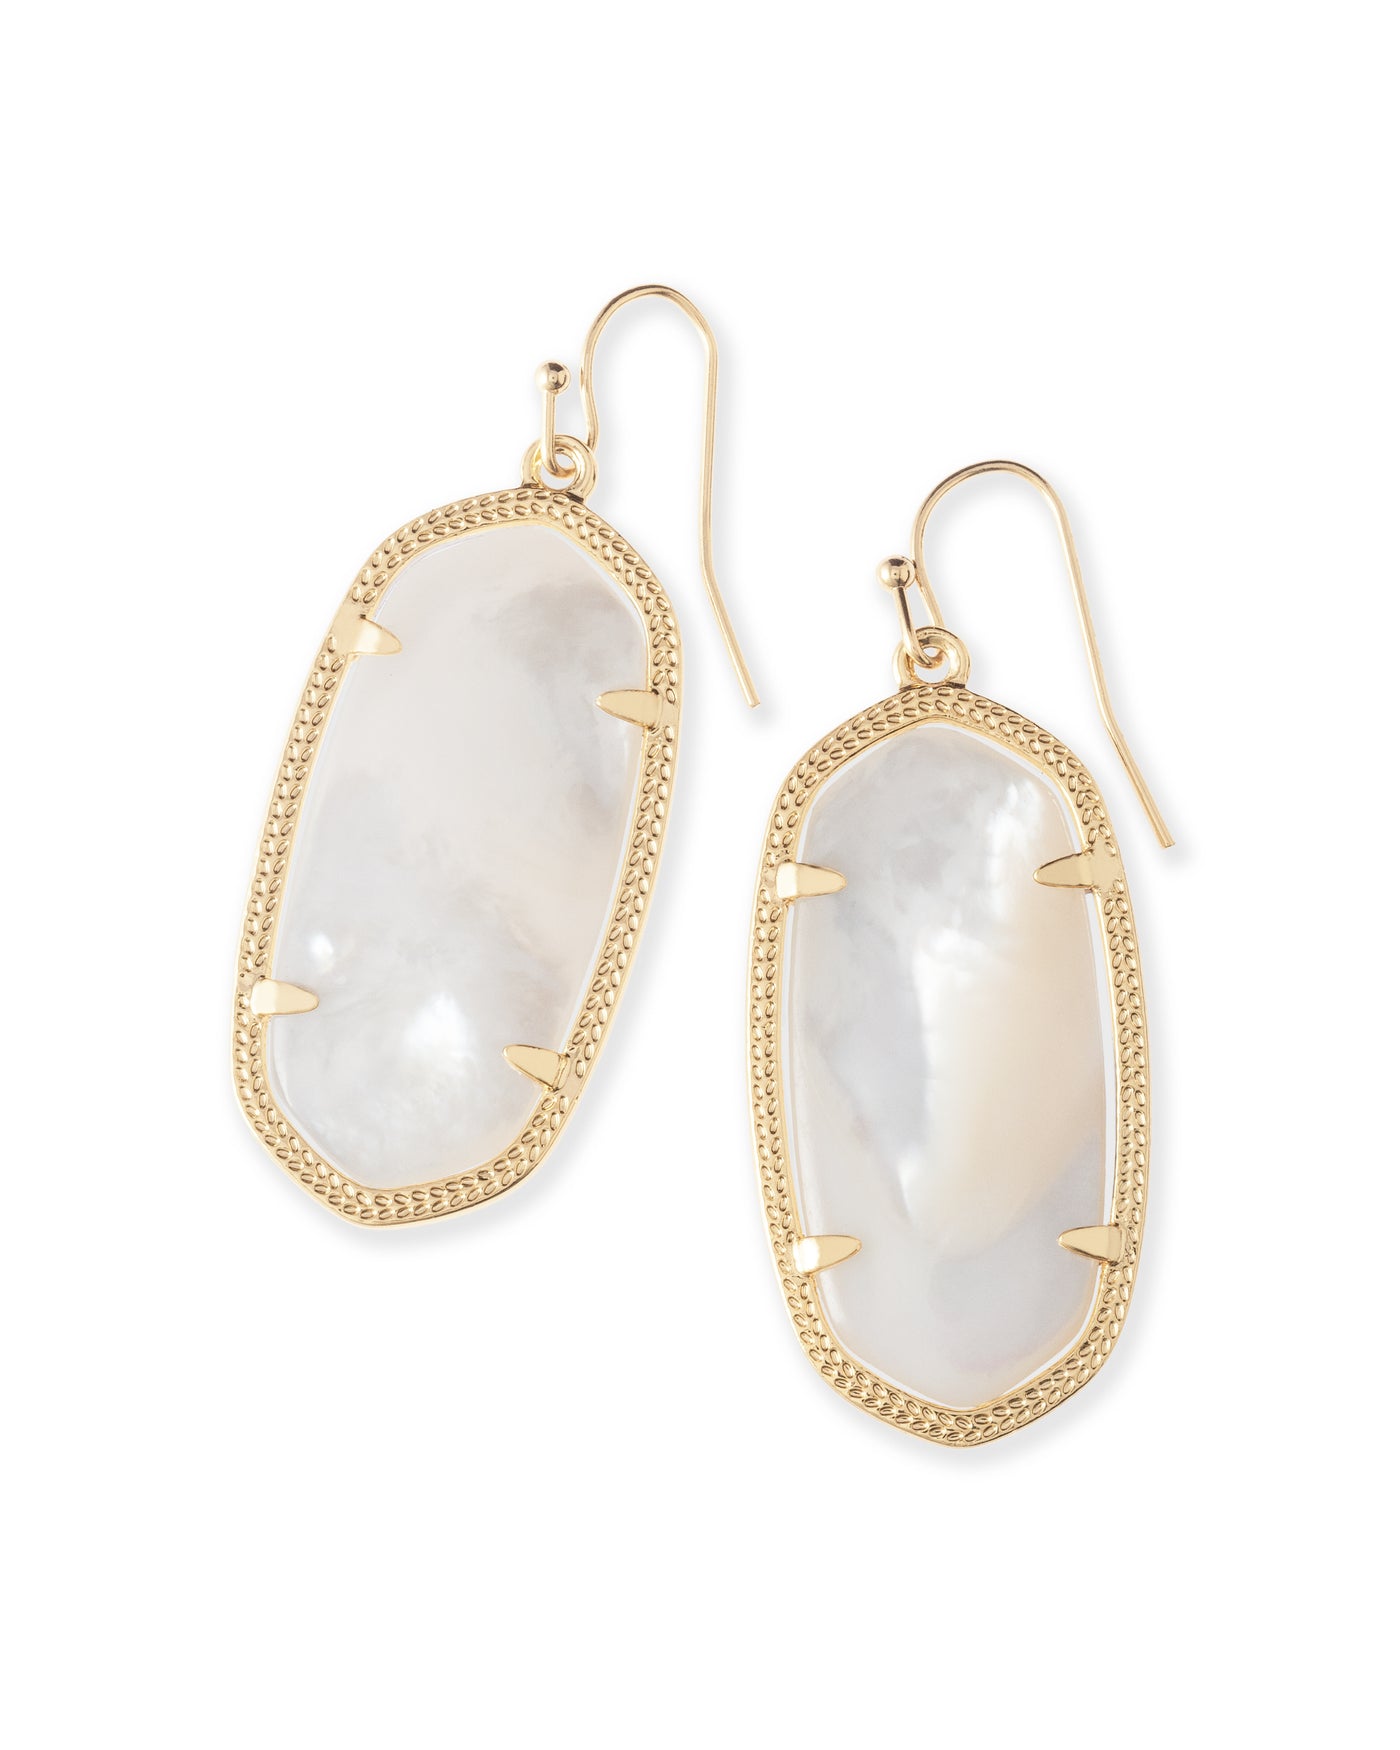 Kendra Scott Elle Gold Drop Earrings in Ivory Mother-of-Pearl-Earrings-Kendra Scott-Market Street Nest, Fashionable Clothing, Shoes and Home Décor Located in Mabank, TX